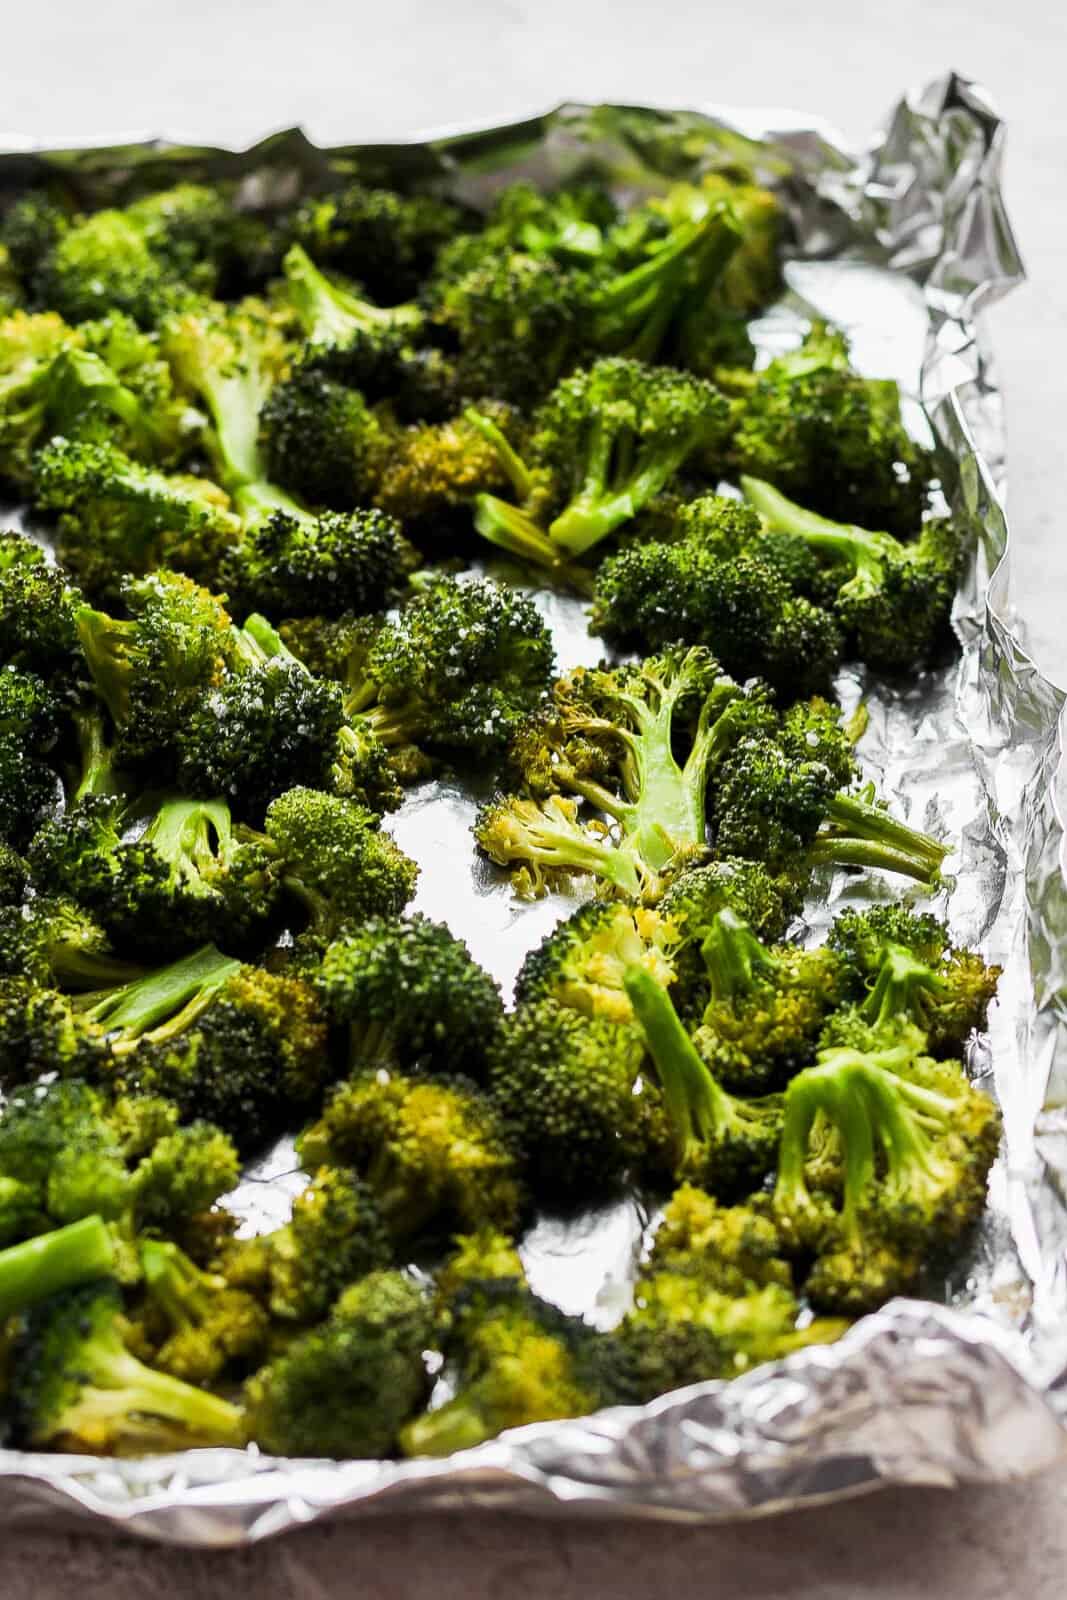 Easy smoked broccoli in an aluminum foil boat but off the smoker.